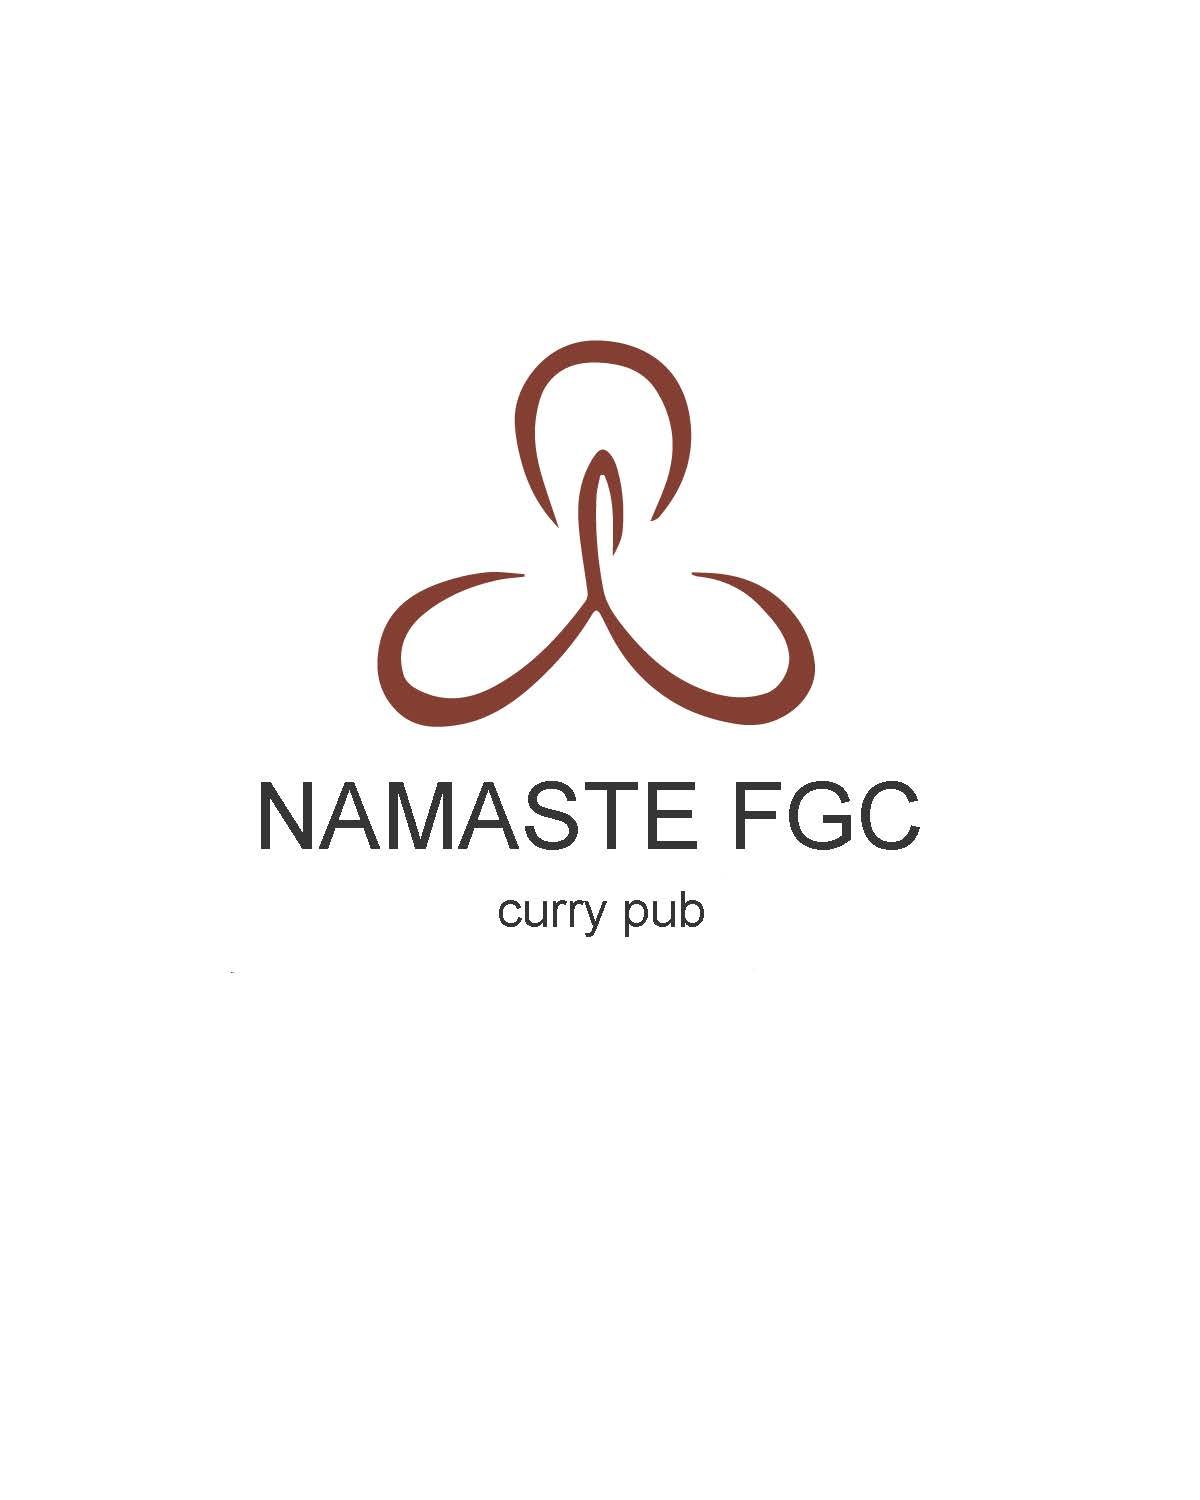 Welcome to Namaste FGC